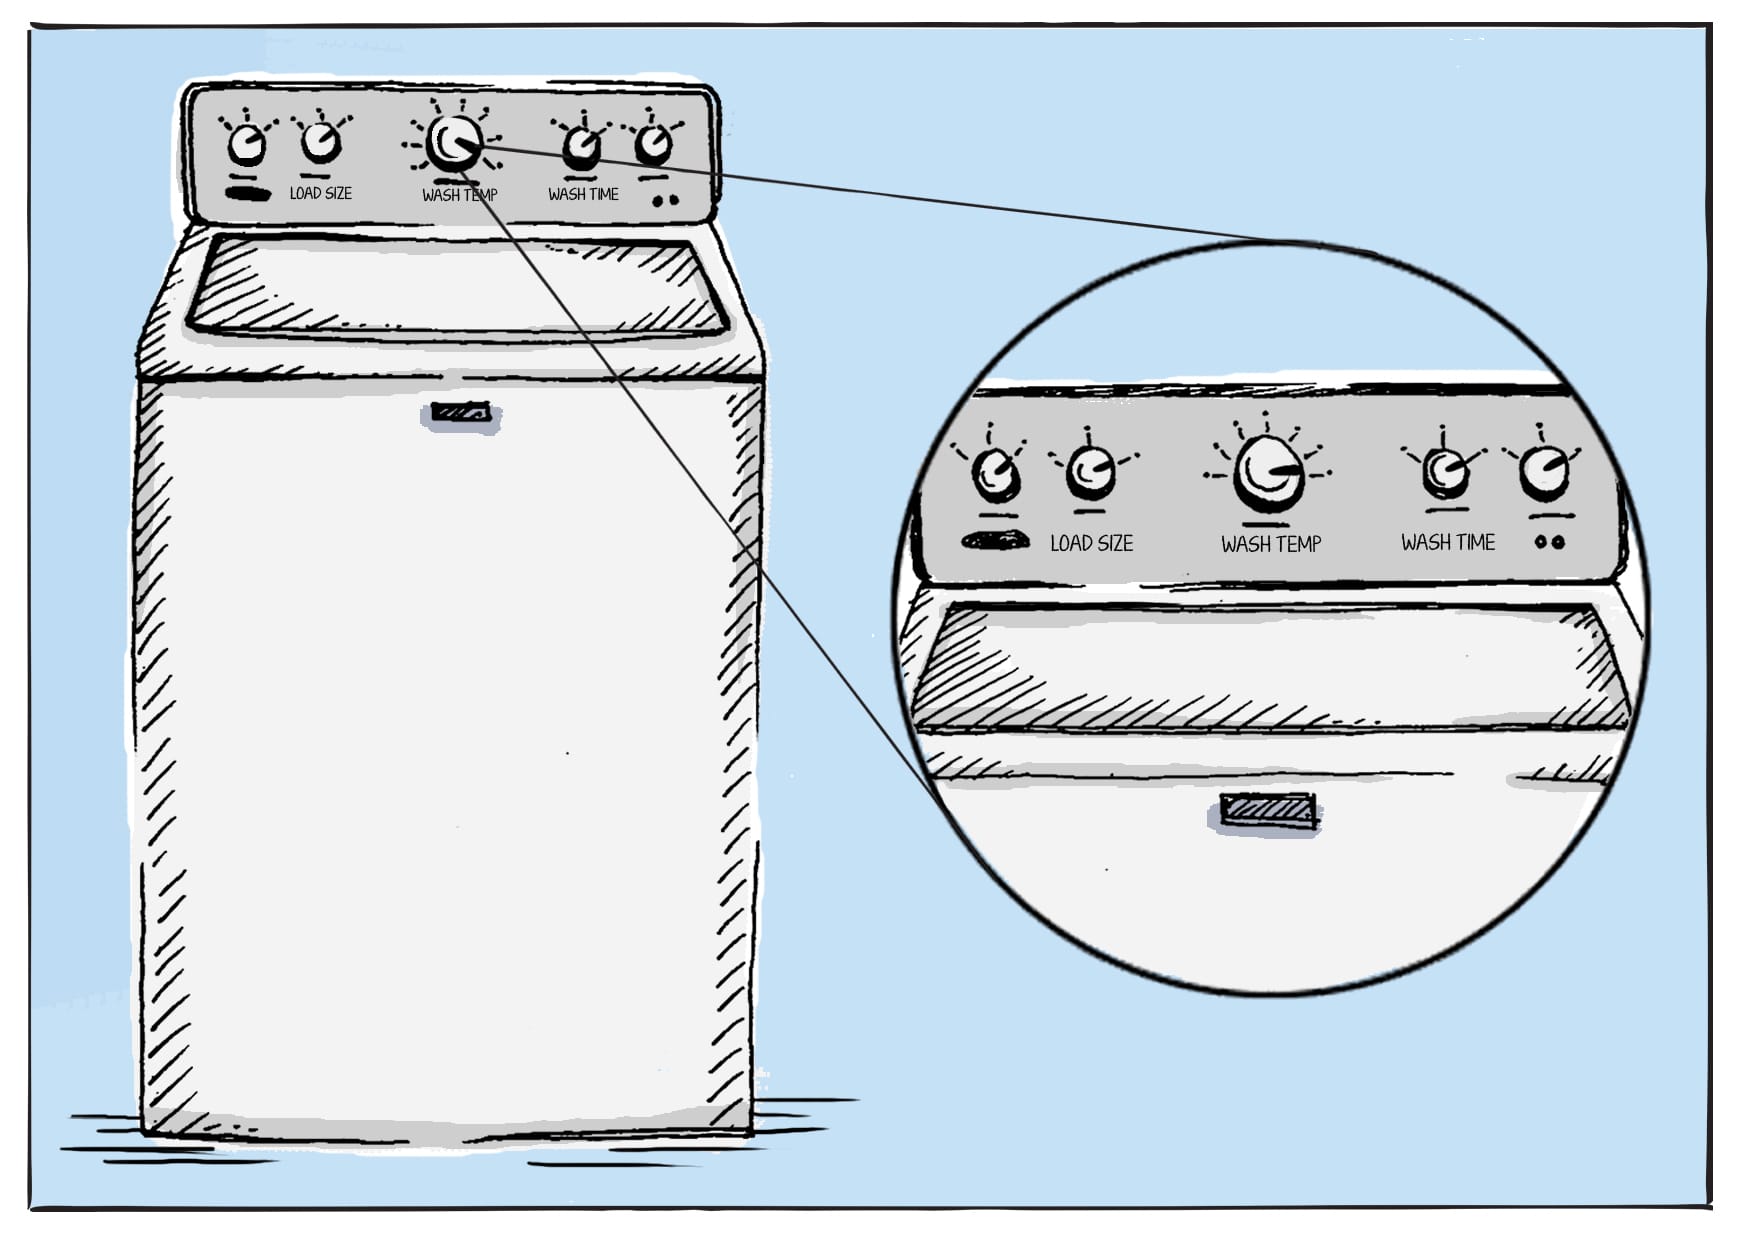 How to Clean a Top-Load Washing Machine